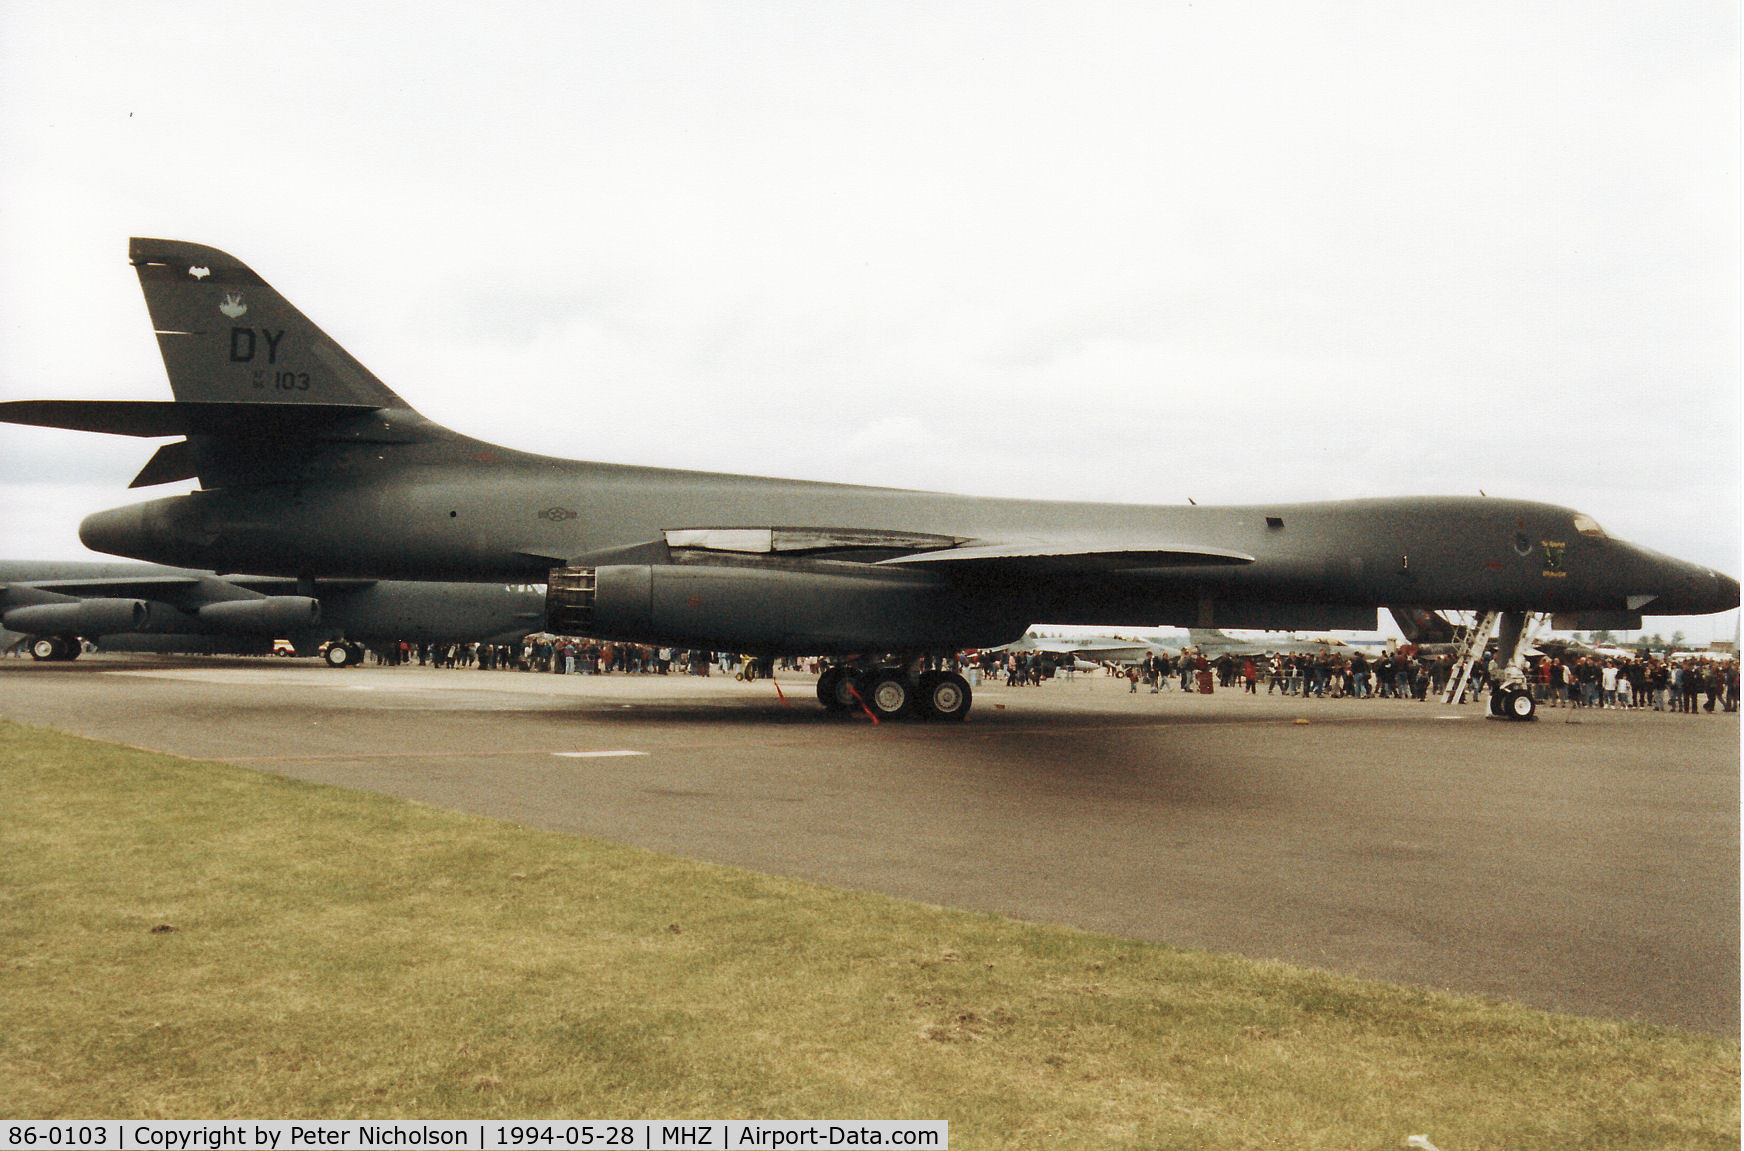 86-0103, 1986 Rockwell B-1B Lancer C/N 63, Another view of The Reluctant Dragon B-1B Lancer from Dyess AFB's 7th Bomb Wing on display at the 1994 RAF Mildenhall Air Fete.